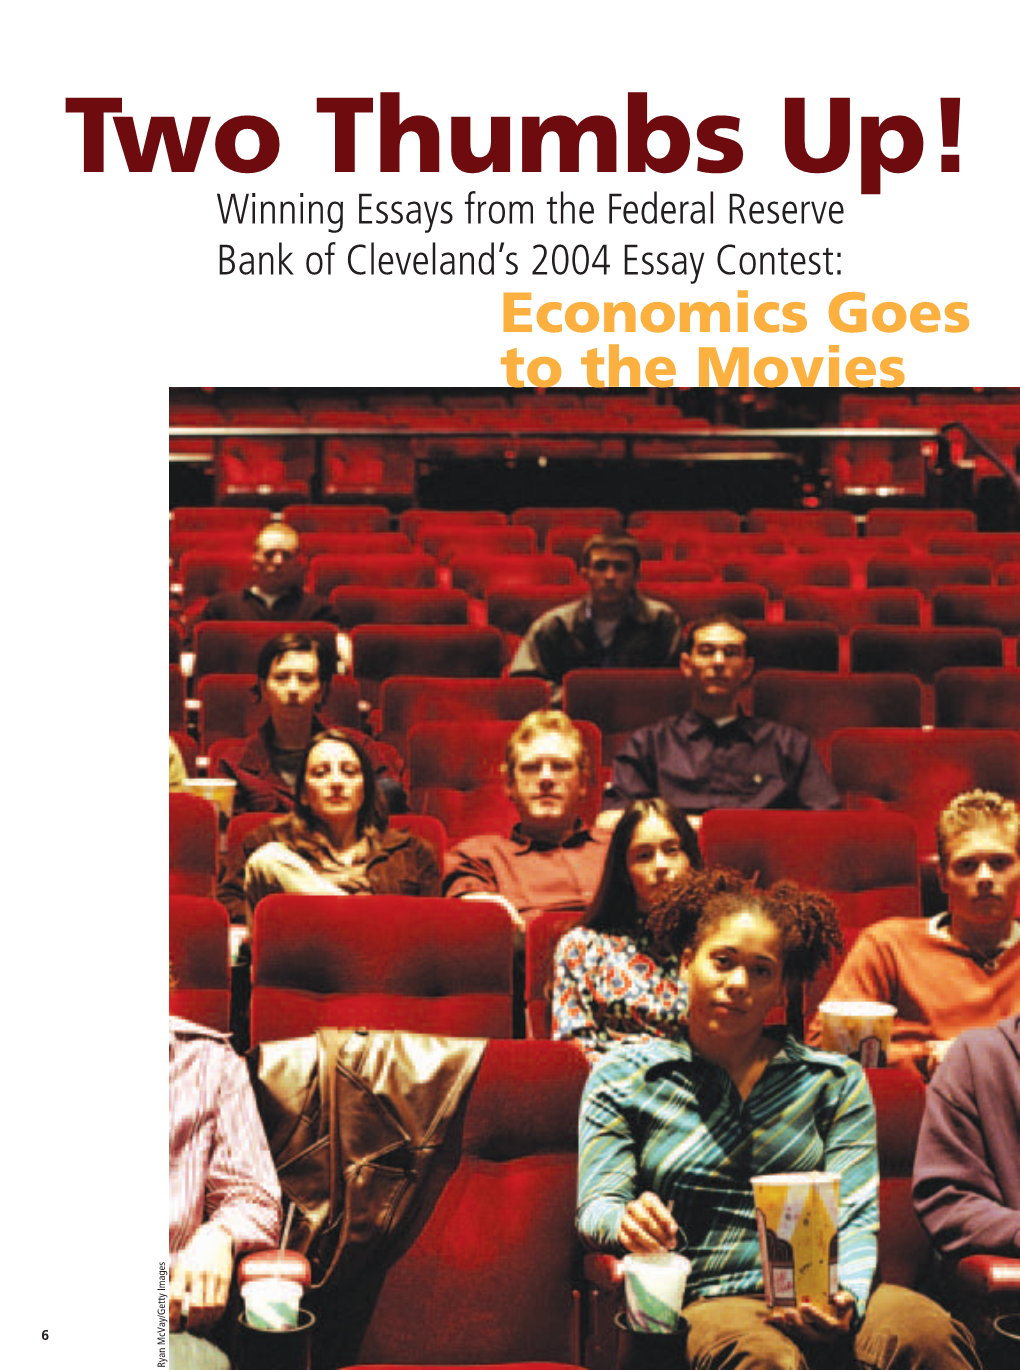 Winning Essays from the Federal Reserve Bank of Cleveland's 2004